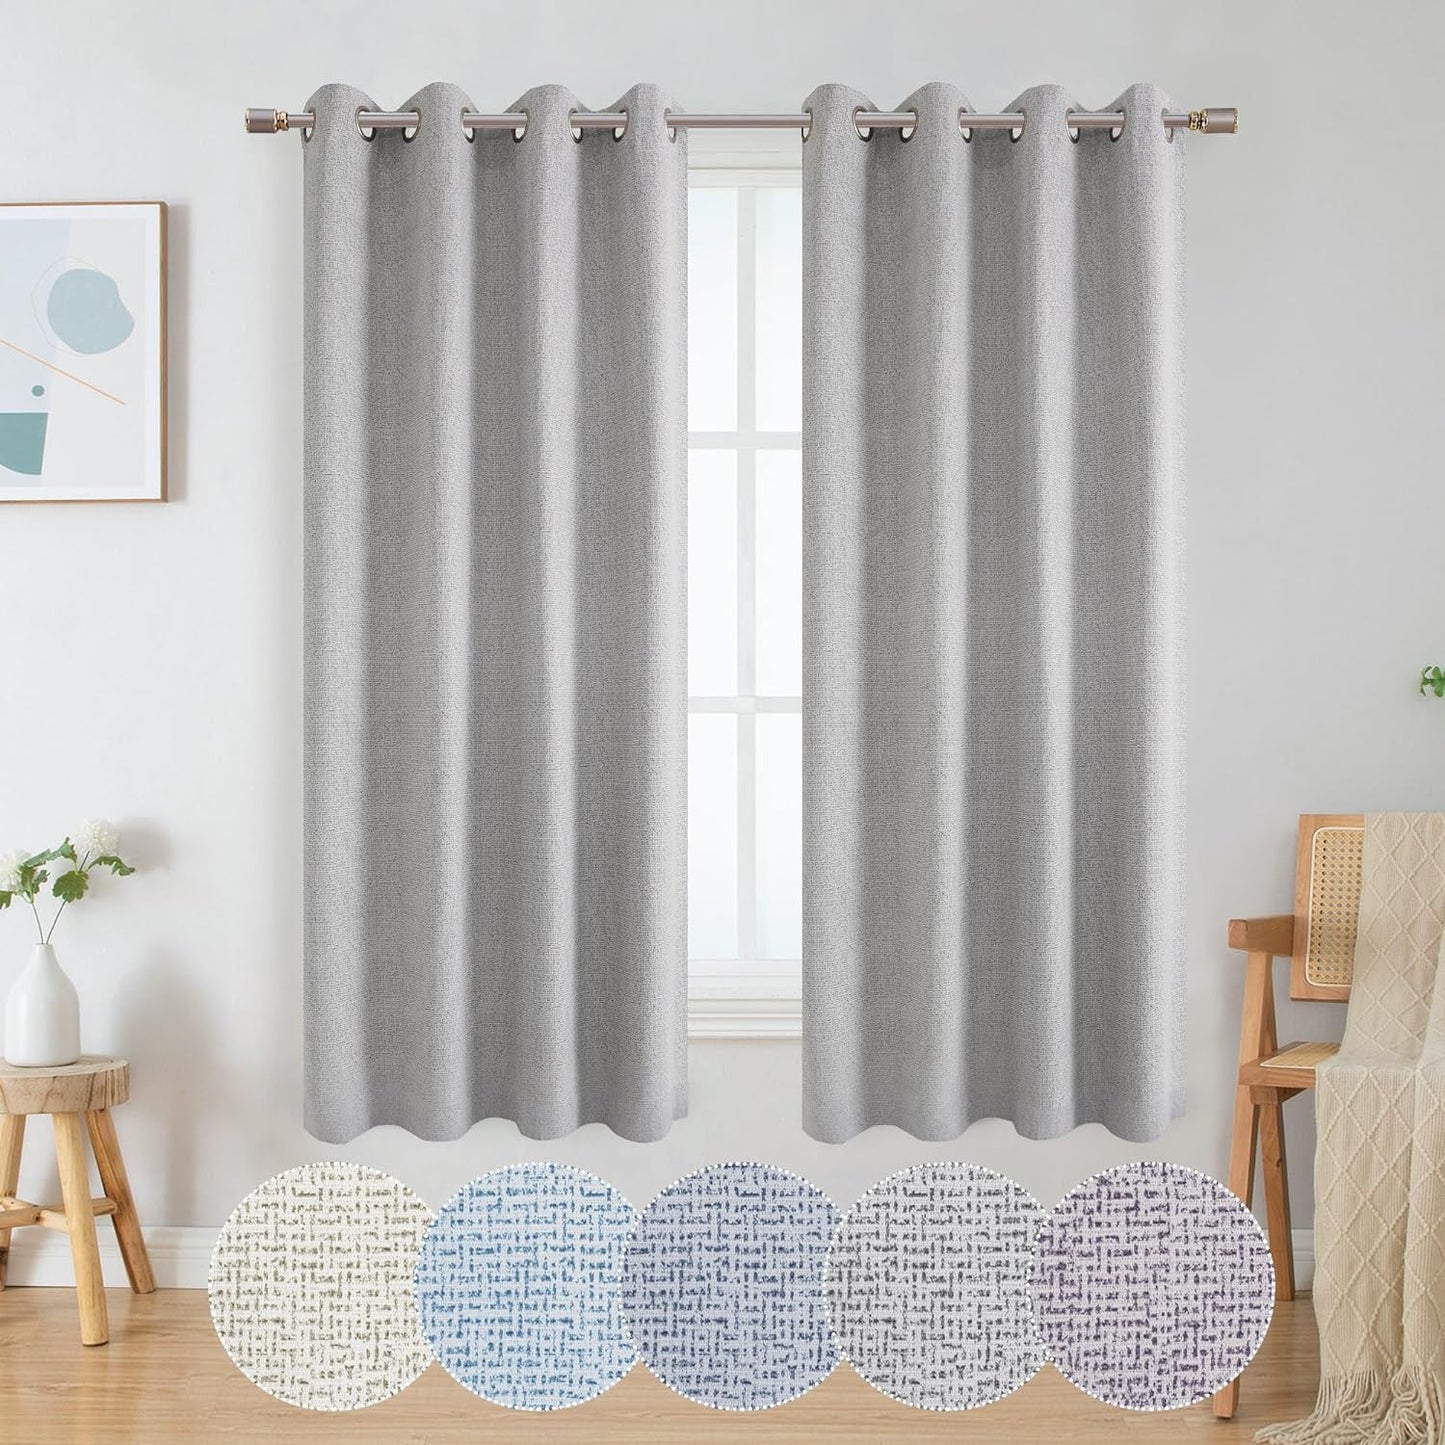 OWENIE Luke Black Out Curtains 63 Inch Long 2 Panels for Bedroom, Geometric Printed Completely Blackout Room Darkening Curtains, Grommet Thermal Insulated Living Room Curtain, 2 PCS, Each 42Wx63L Inch  OWENIE Grey 42"W X 63"L | 2 Pcs 